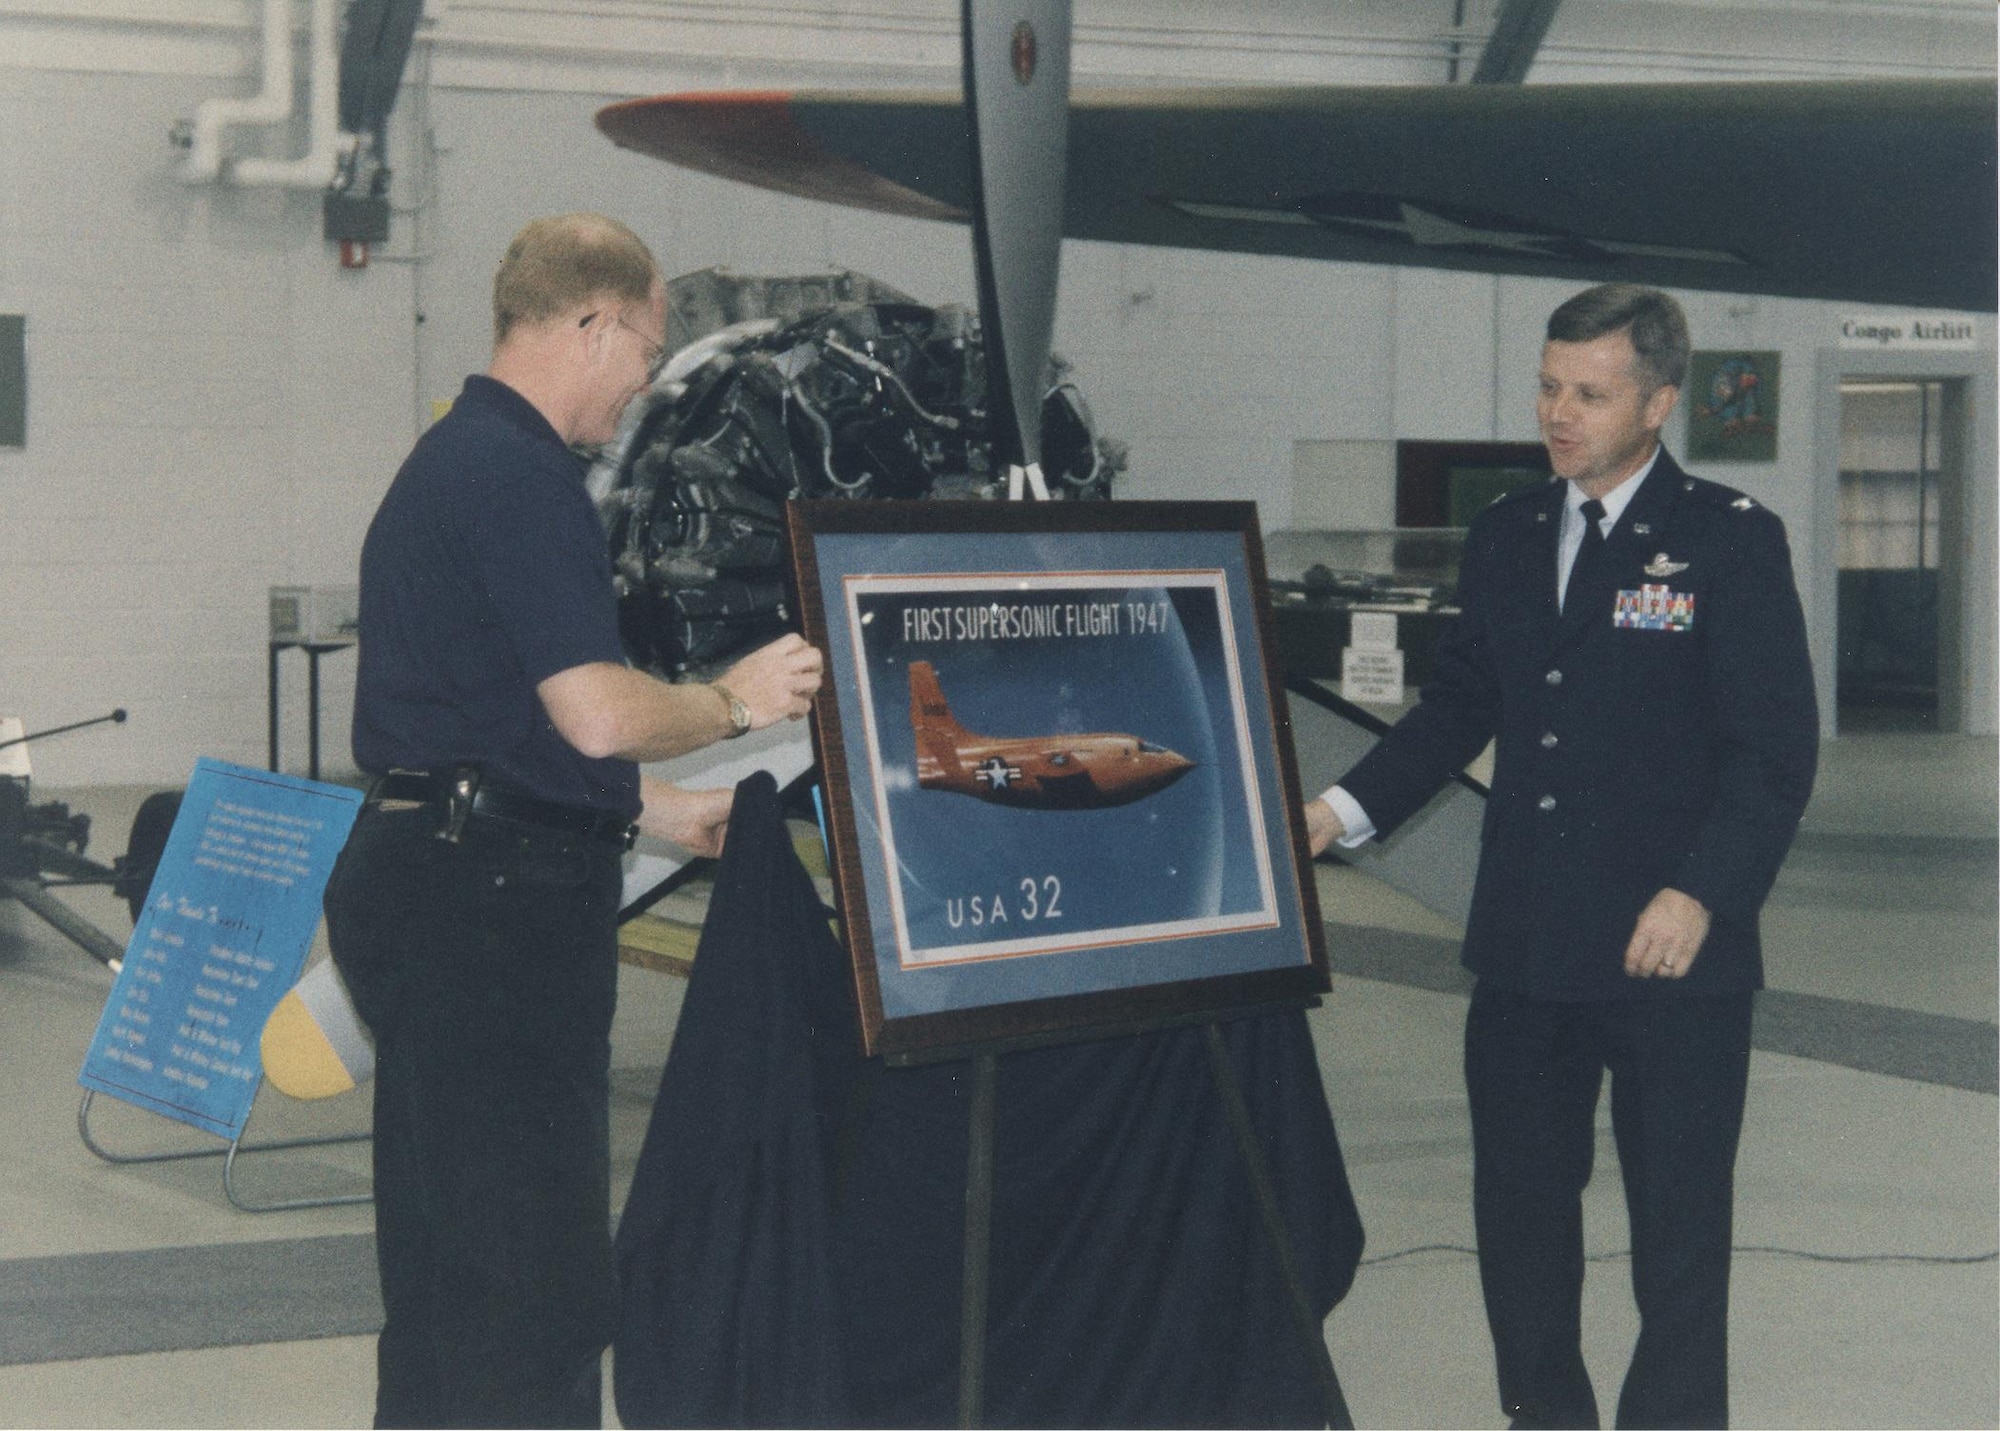 Mike Leister, Air Mobility Command Museum director, and Col. Felix Grieder, 436th Airlift Wing commander, unveil a commemorative U.S. Postal Service stamp September 1997, at the Air Mobility Command Museum on Dover Air Force Base, Del. This stamp was one of a series that honored the Air Force’s 50th anniversary. (Courtesy photo/Harry Heist)